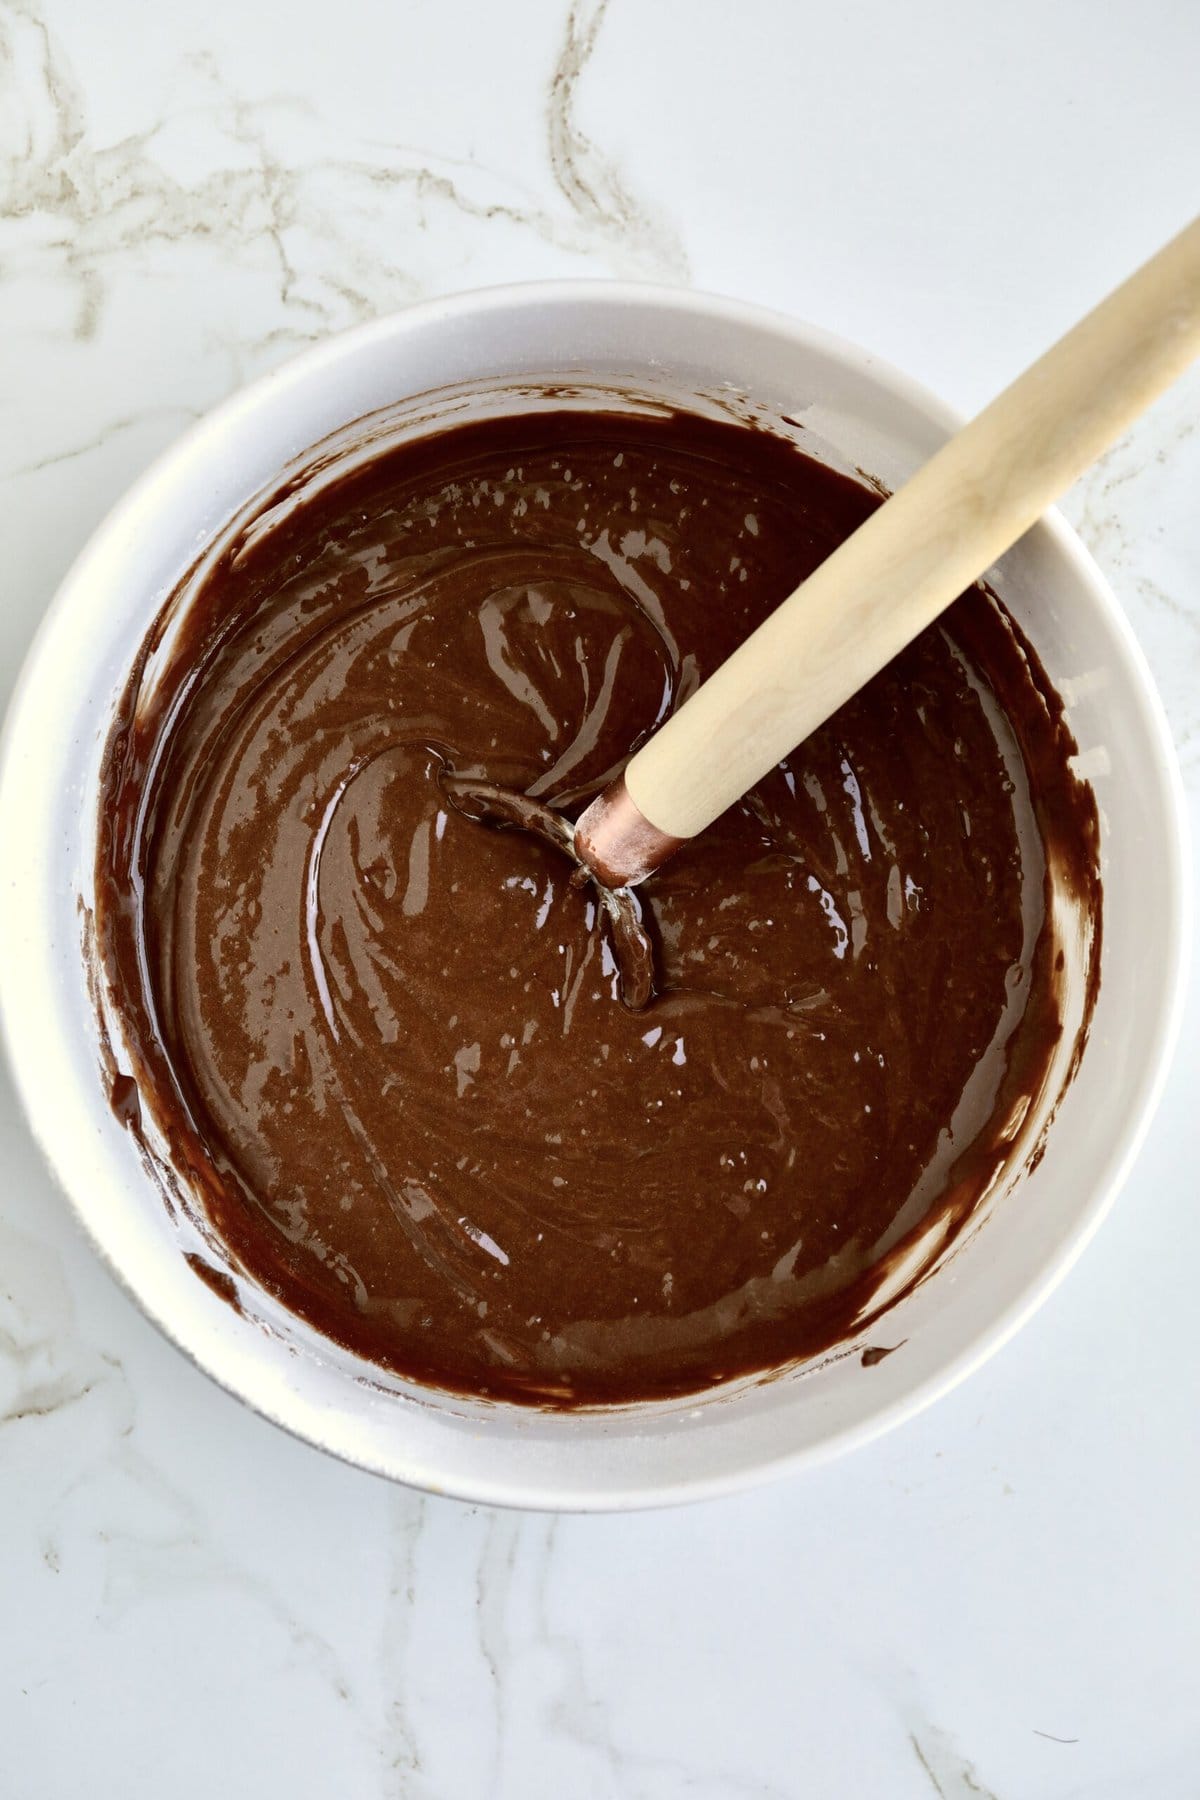 How to make chocolate olive oil cake step-by-step photos- mixing the dry and wet ingredients together in a bowl. Whisk in the bowl.